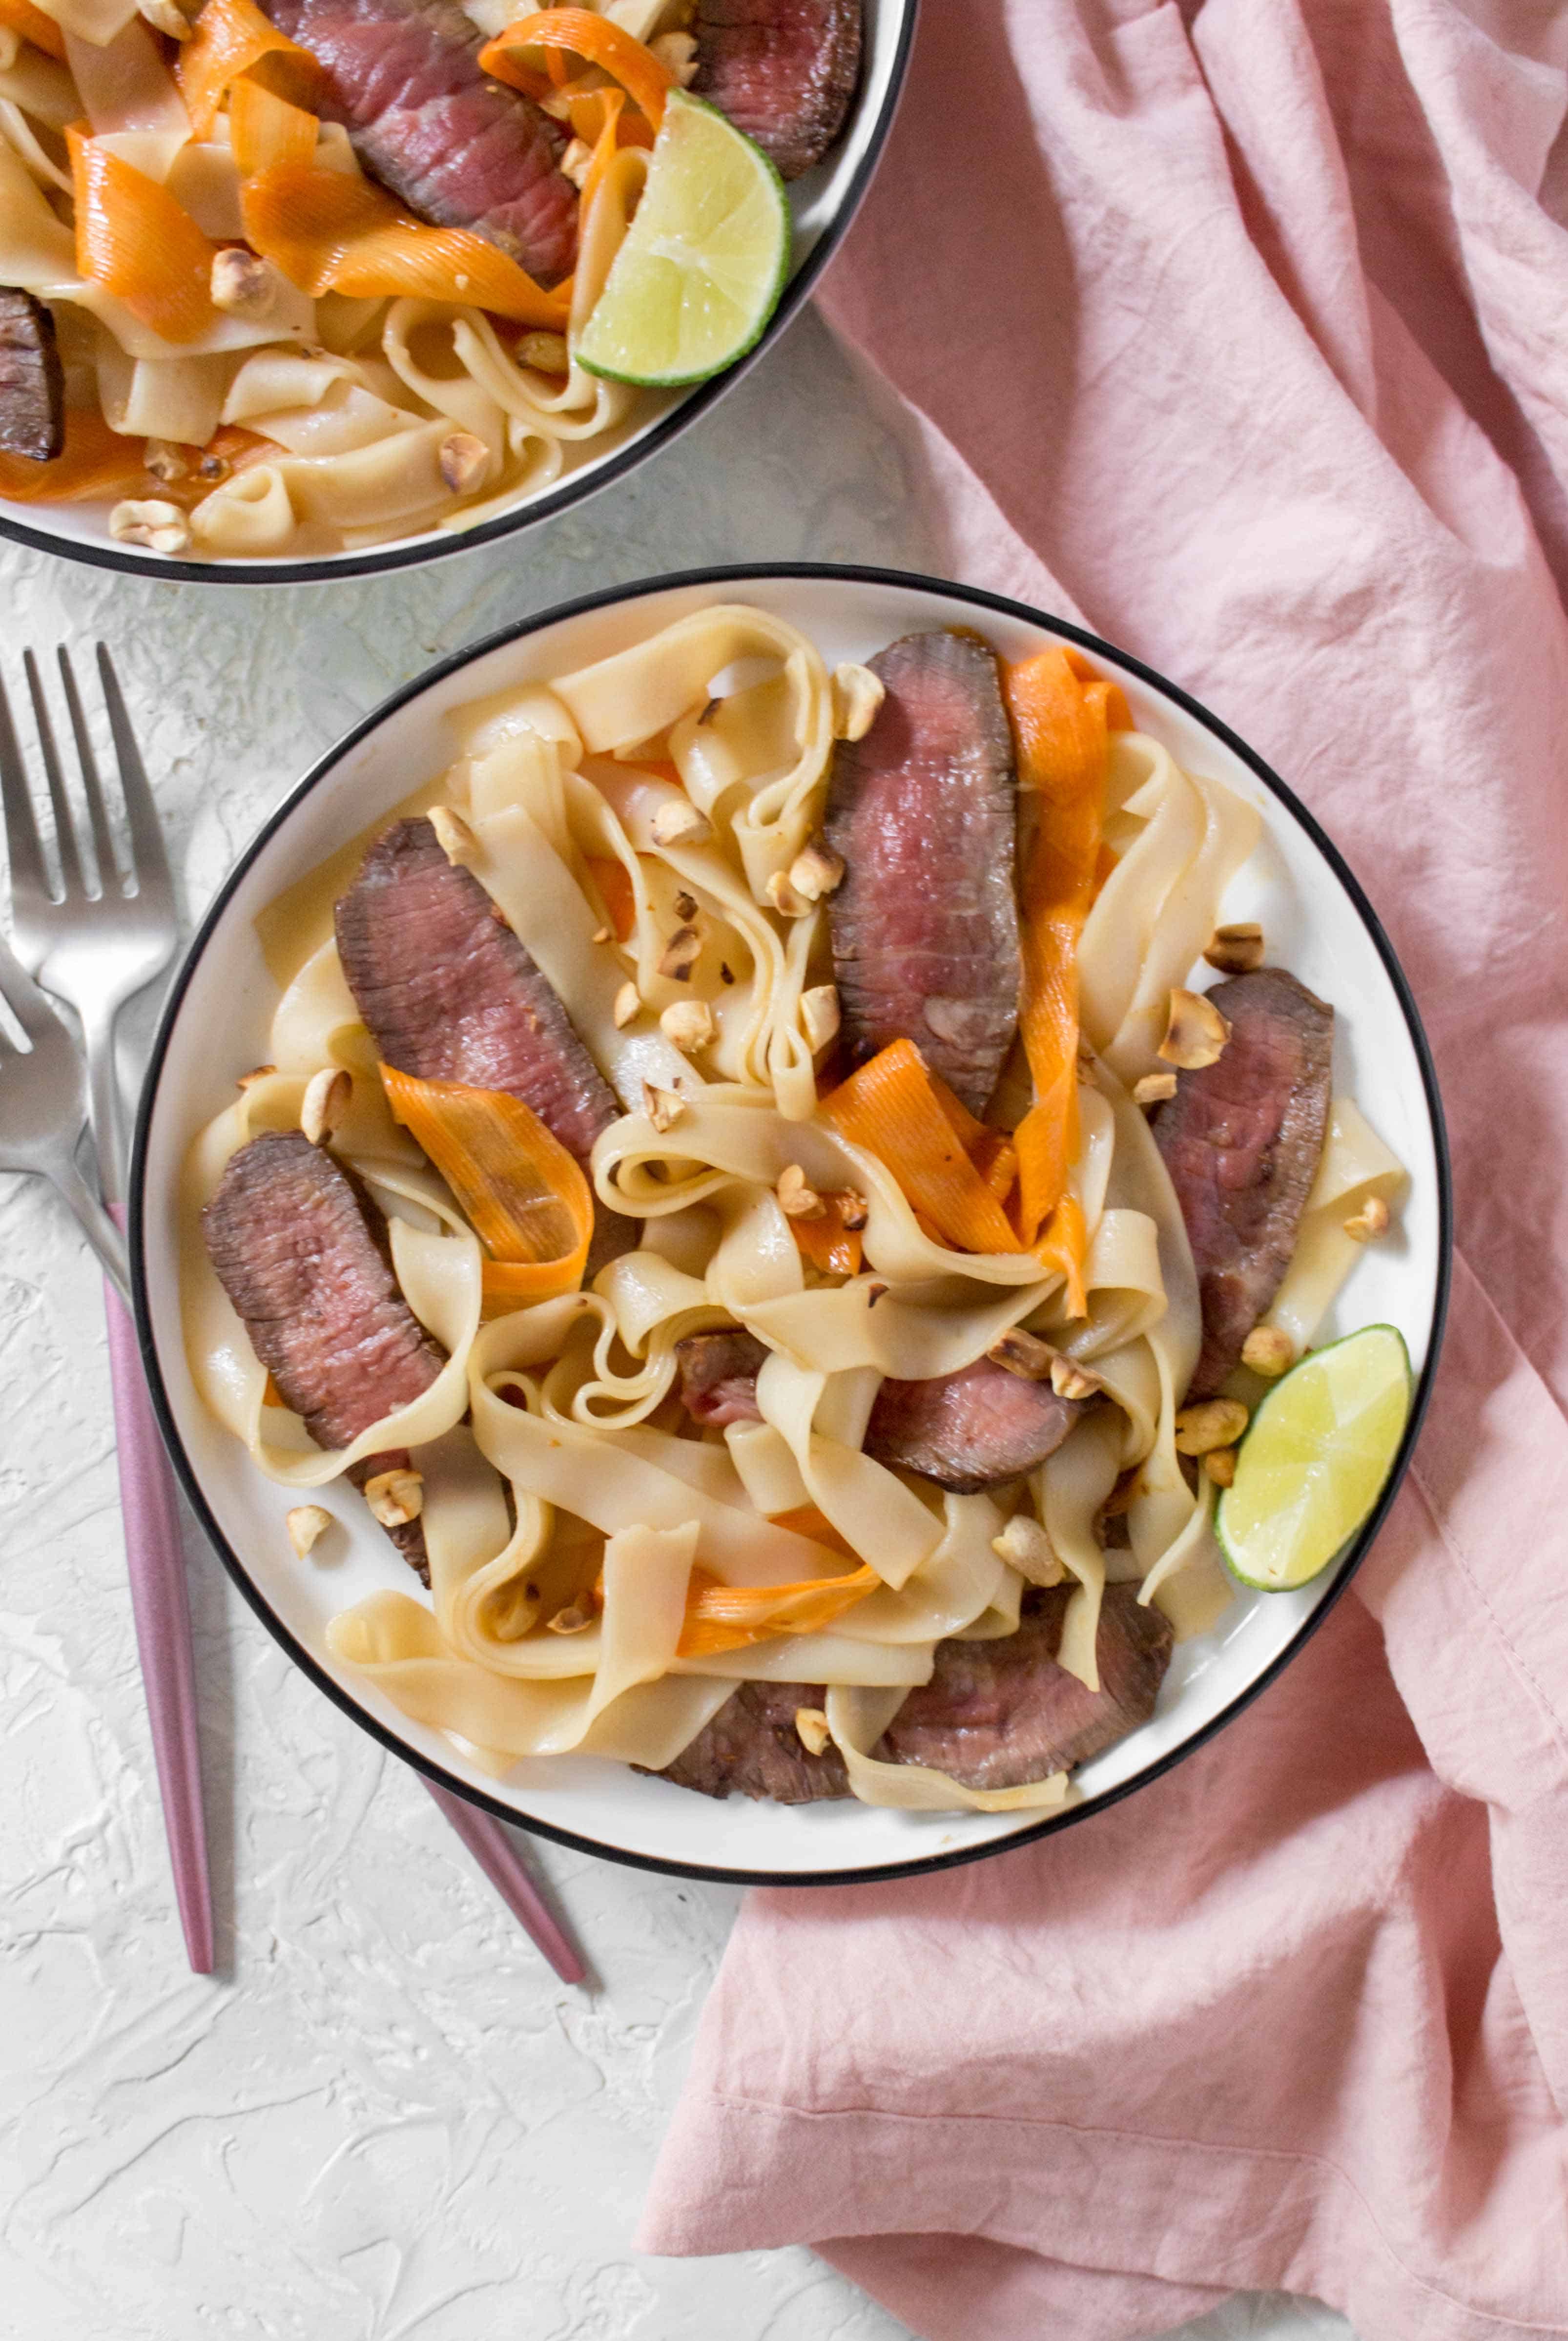 This Vietnamese inspired Beef Noodle Salad is super easy to throw together on a busy weeknight for dinner and works as a meal prep as well!